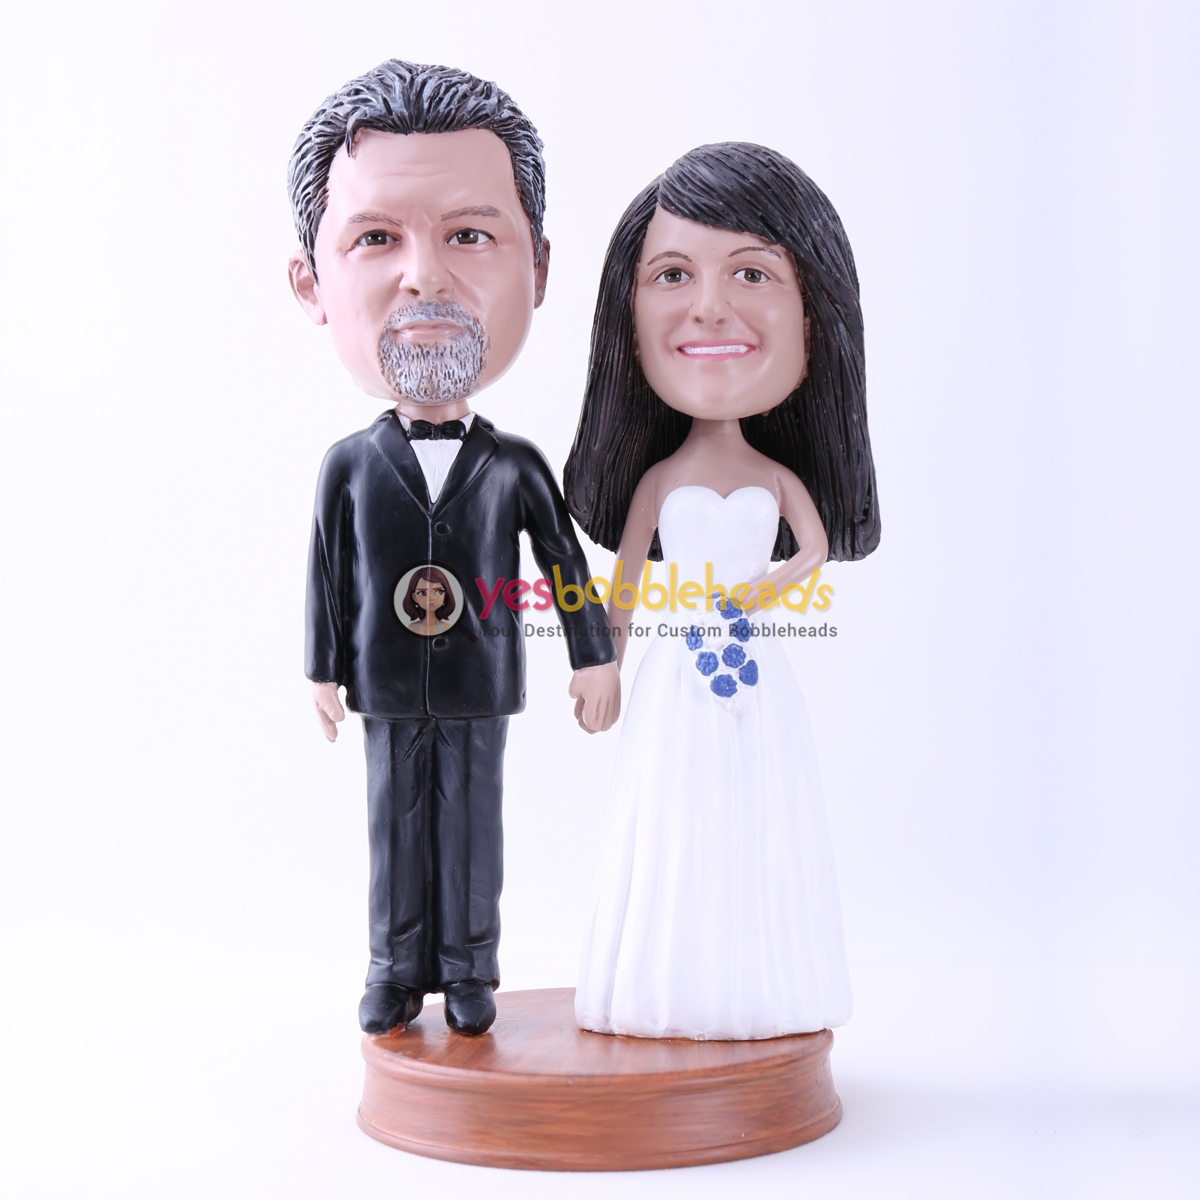 Picture of Custom Bobblehead Doll: Black Suit Groom and White Dressed Bride for Wedding